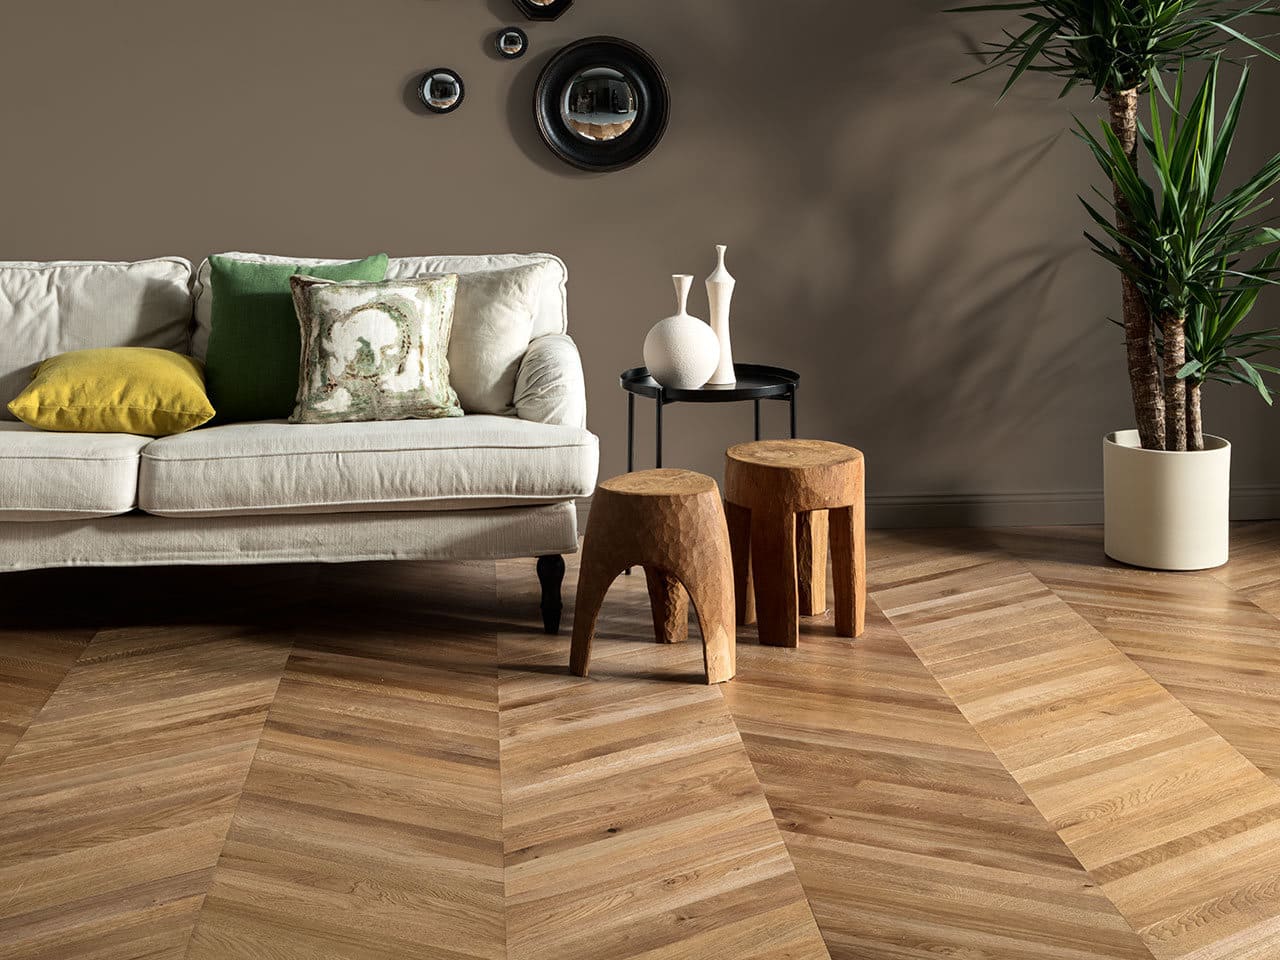 Pavimento in parquet in rovere naturale con posa a spina ungherese